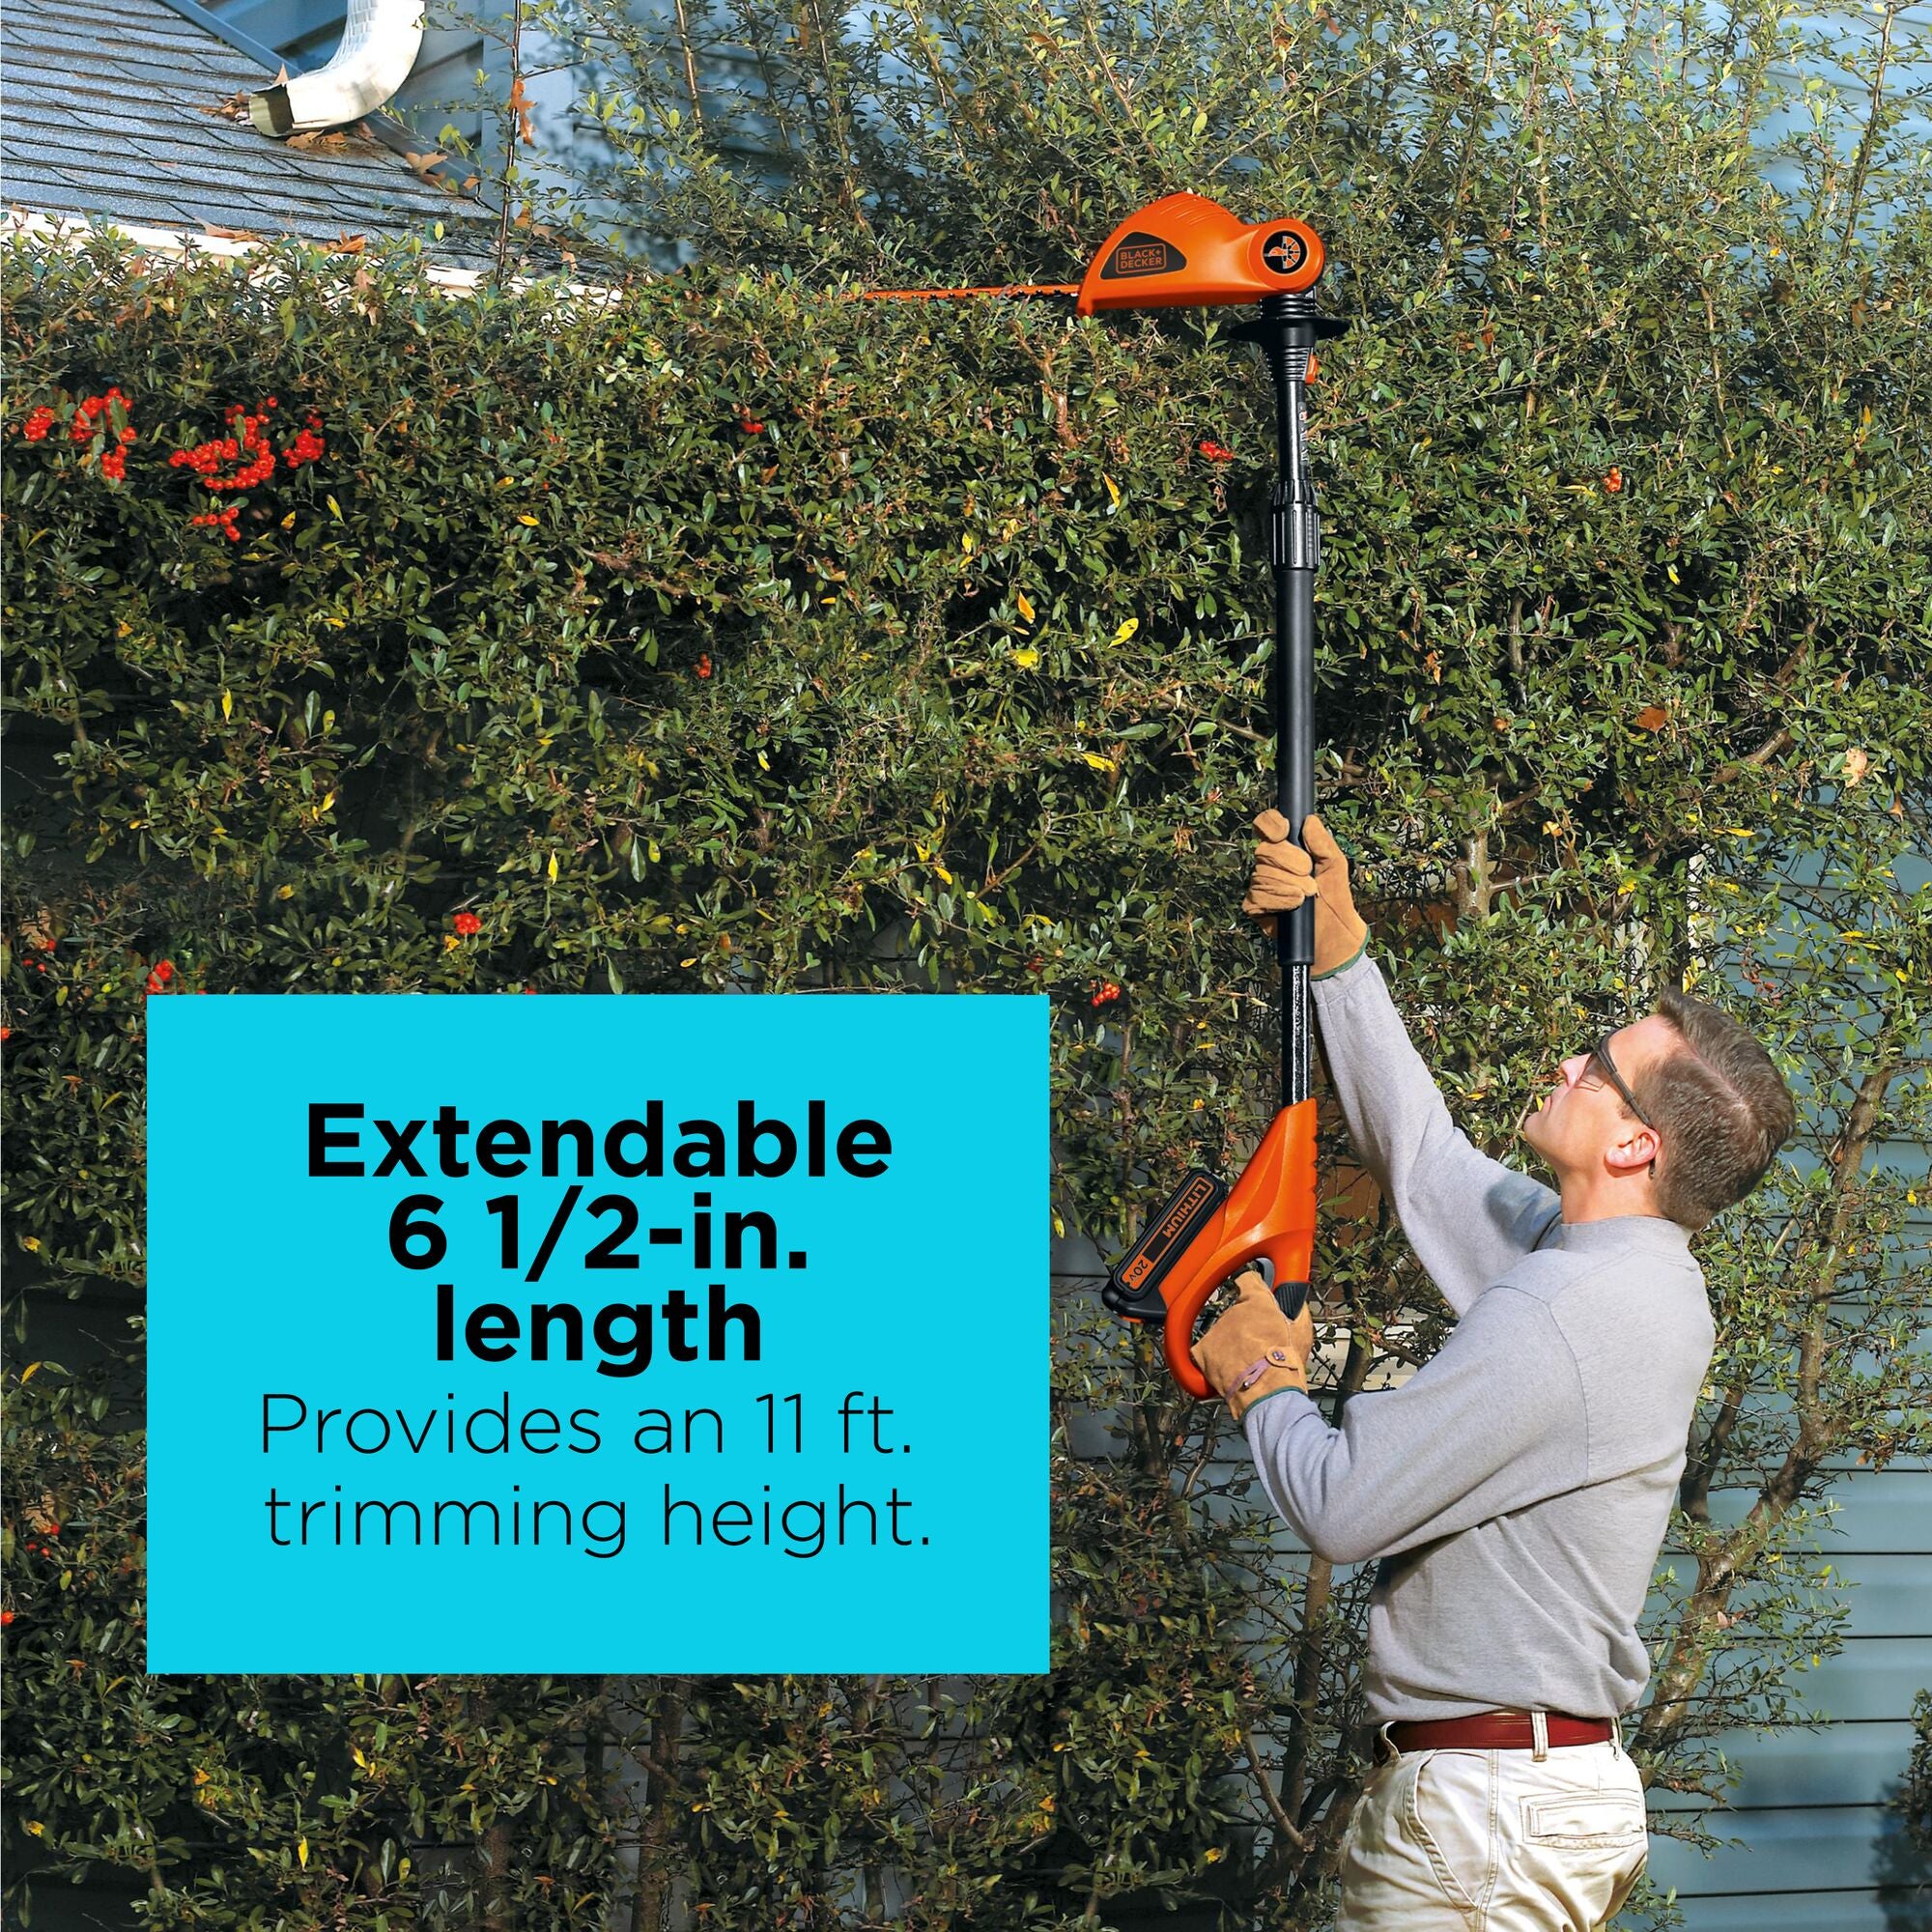 20V Max* Cordless Pole Hedge Trimmer, 18-Inch